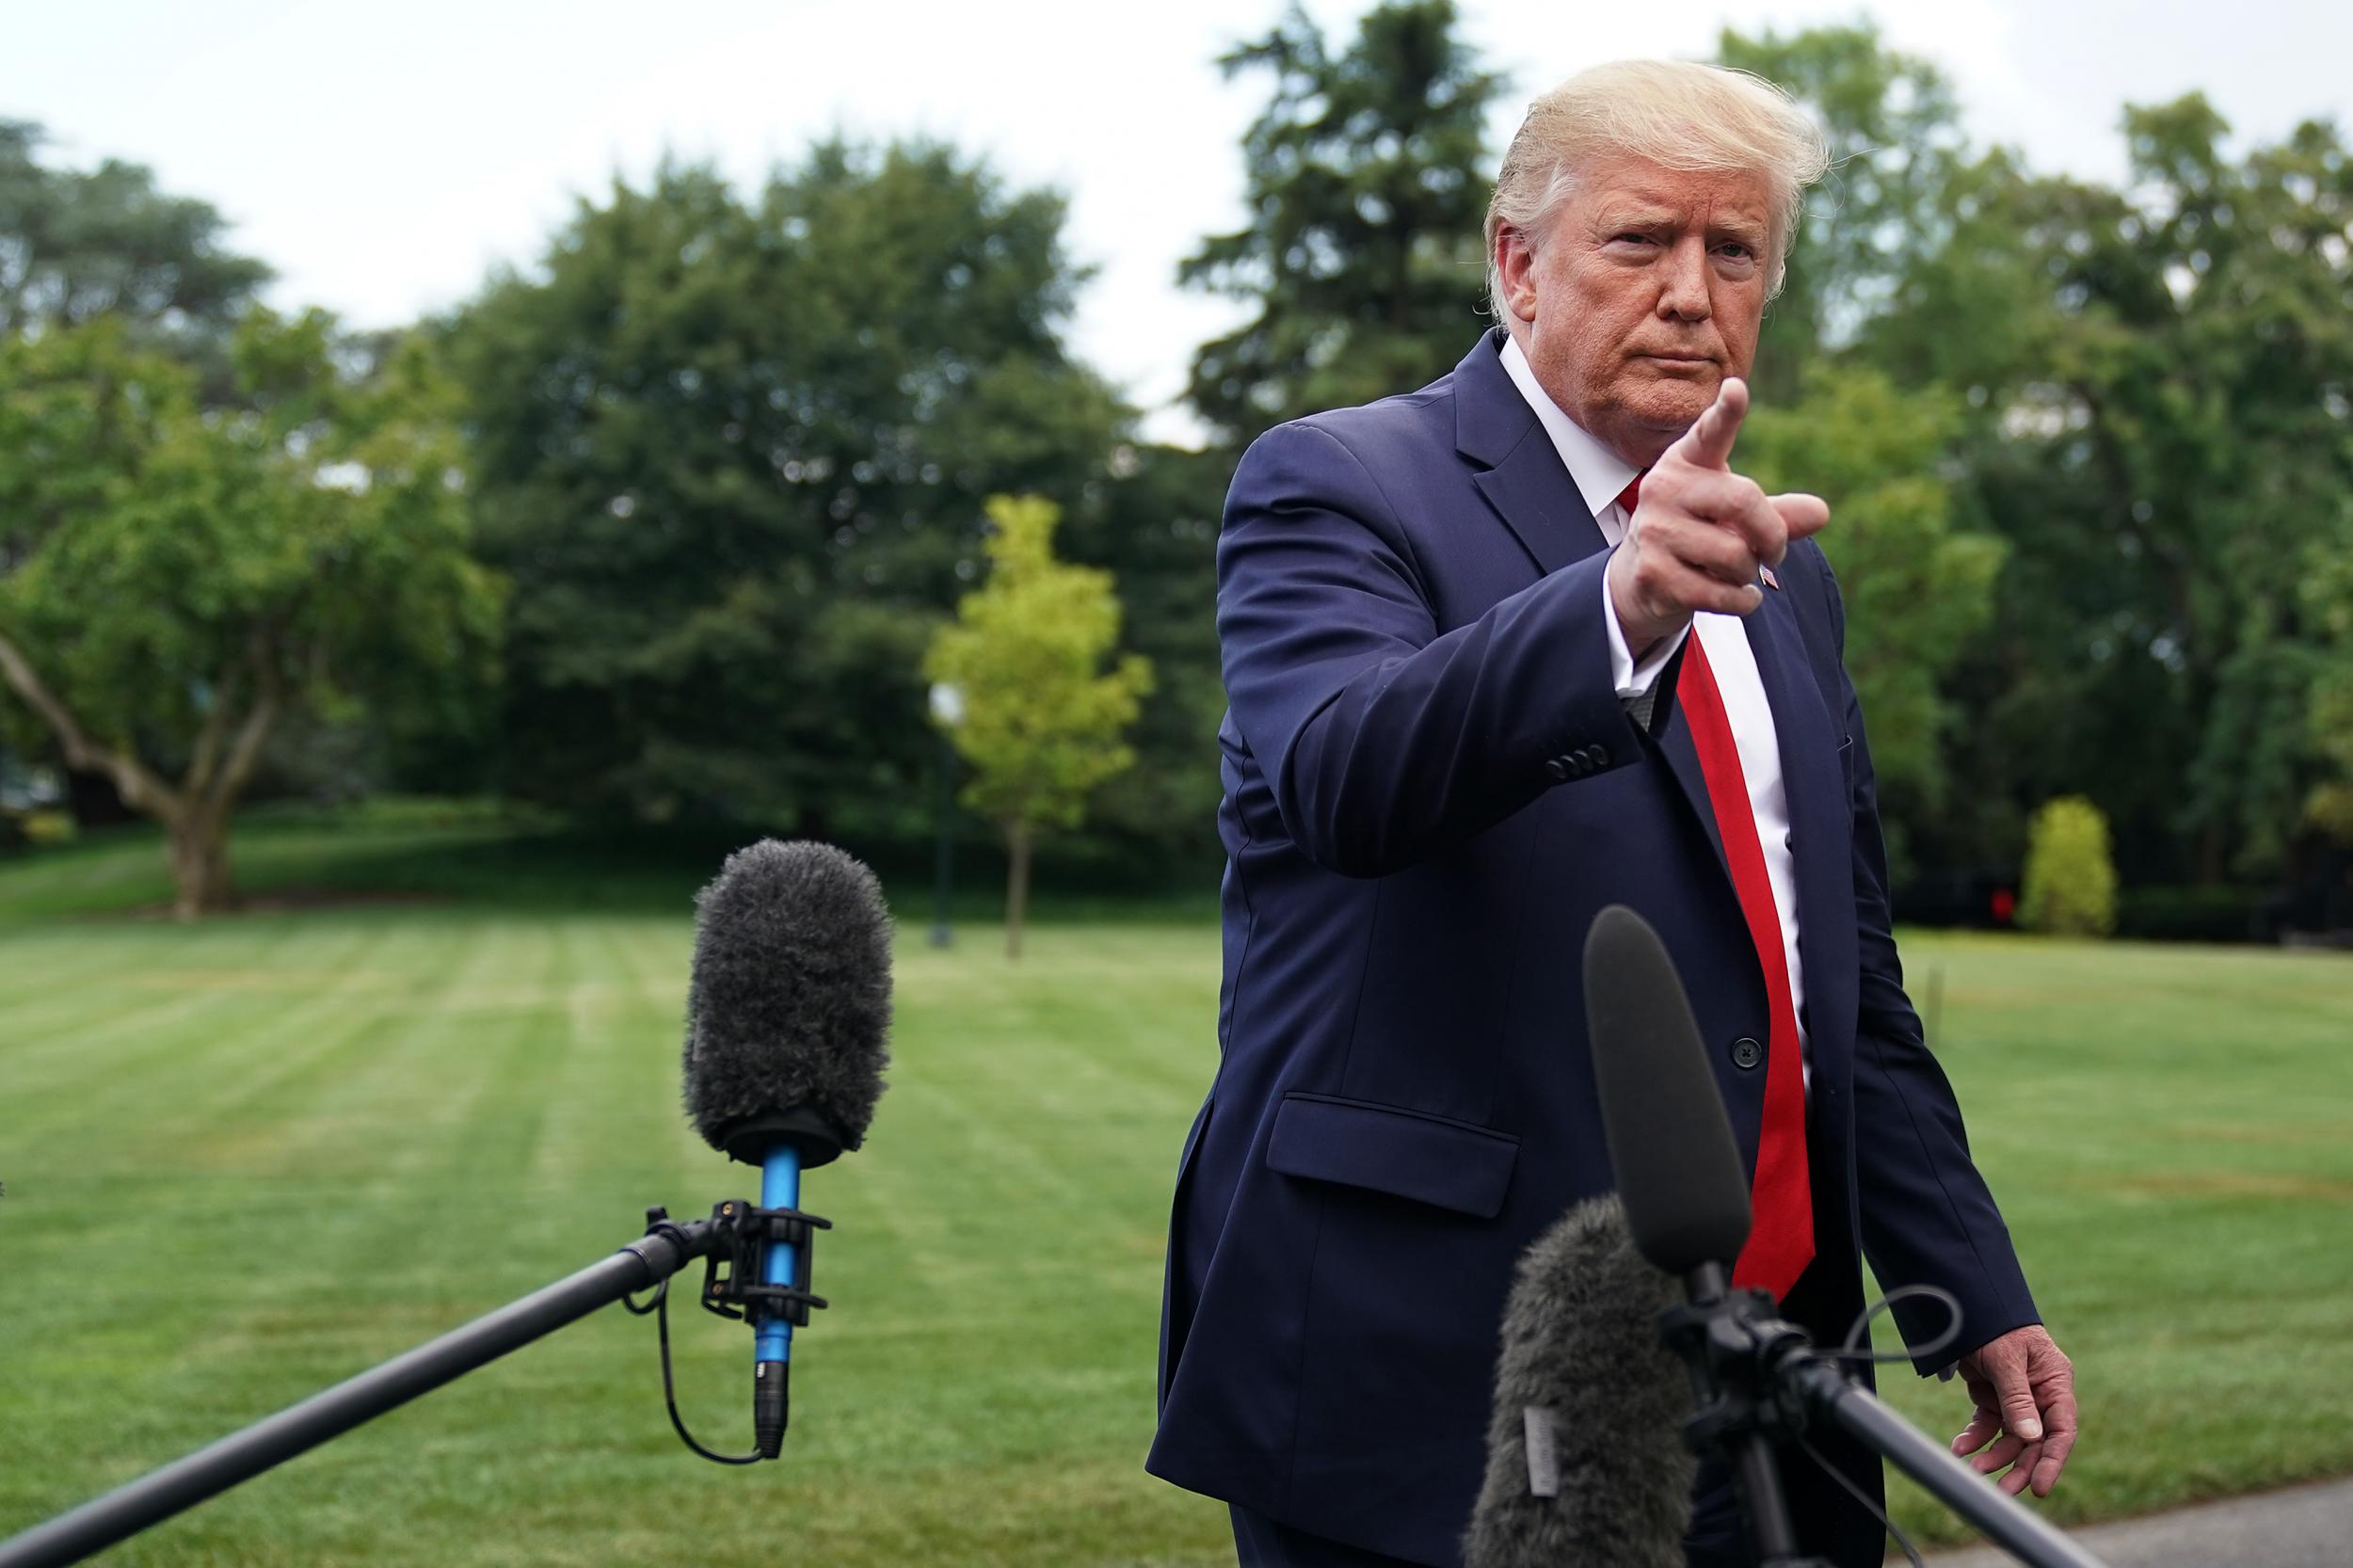 Donald Trump talks to reporters as he departs the White House for a campaign rally July 17, 2019 in Washington, DC